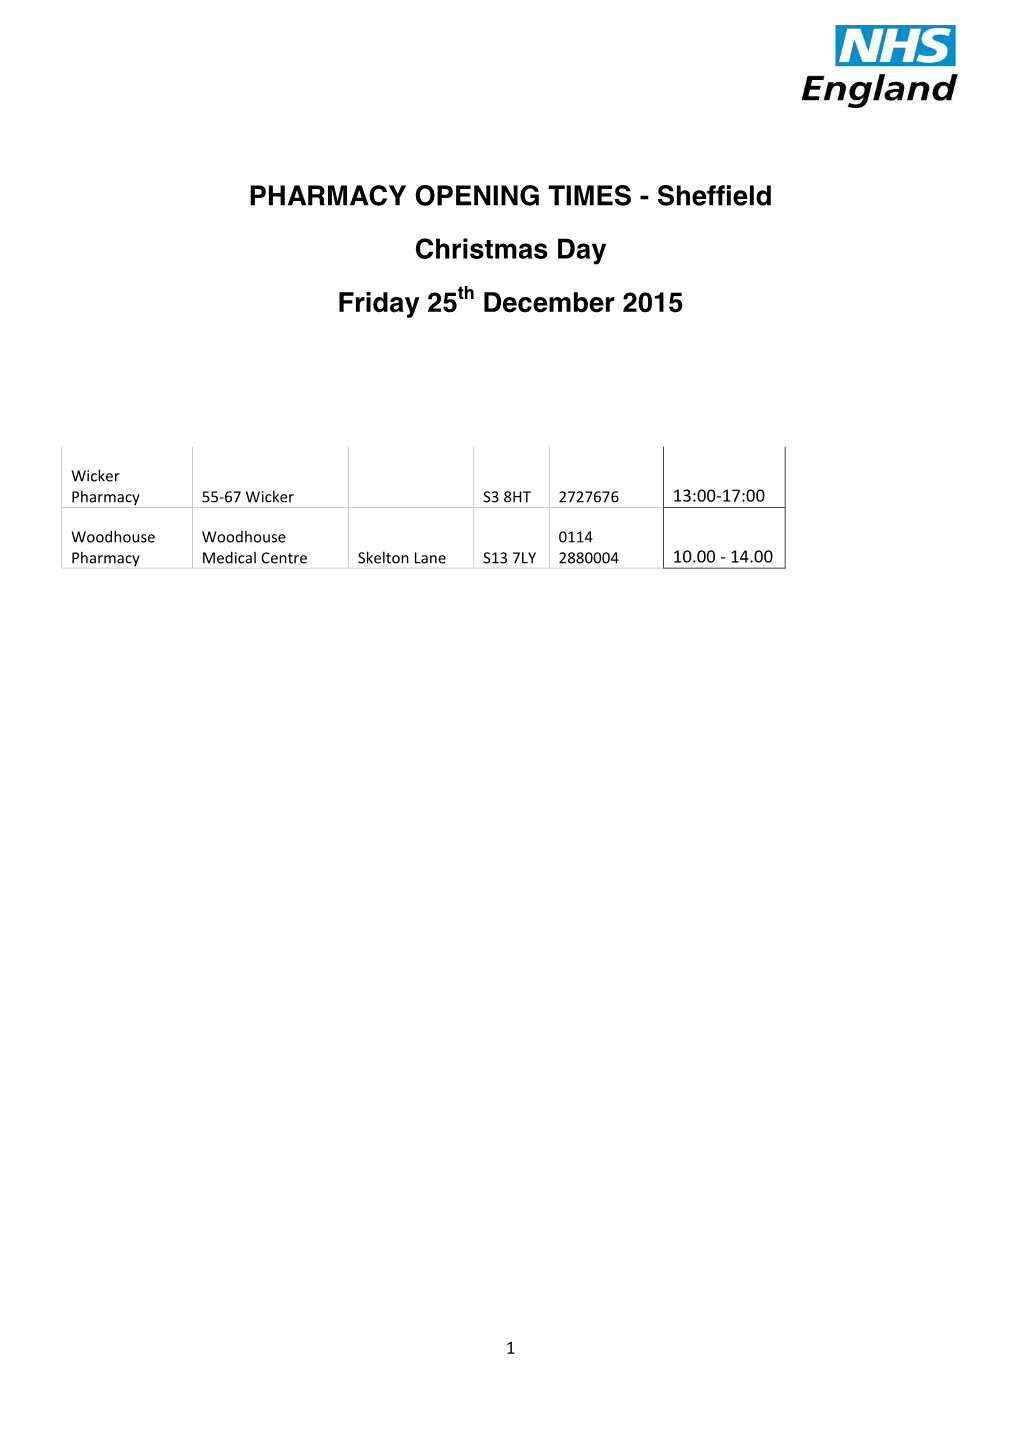 PHARMACY OPENING TIMES - Sheffield Christmas Day Friday 25Th December 2015